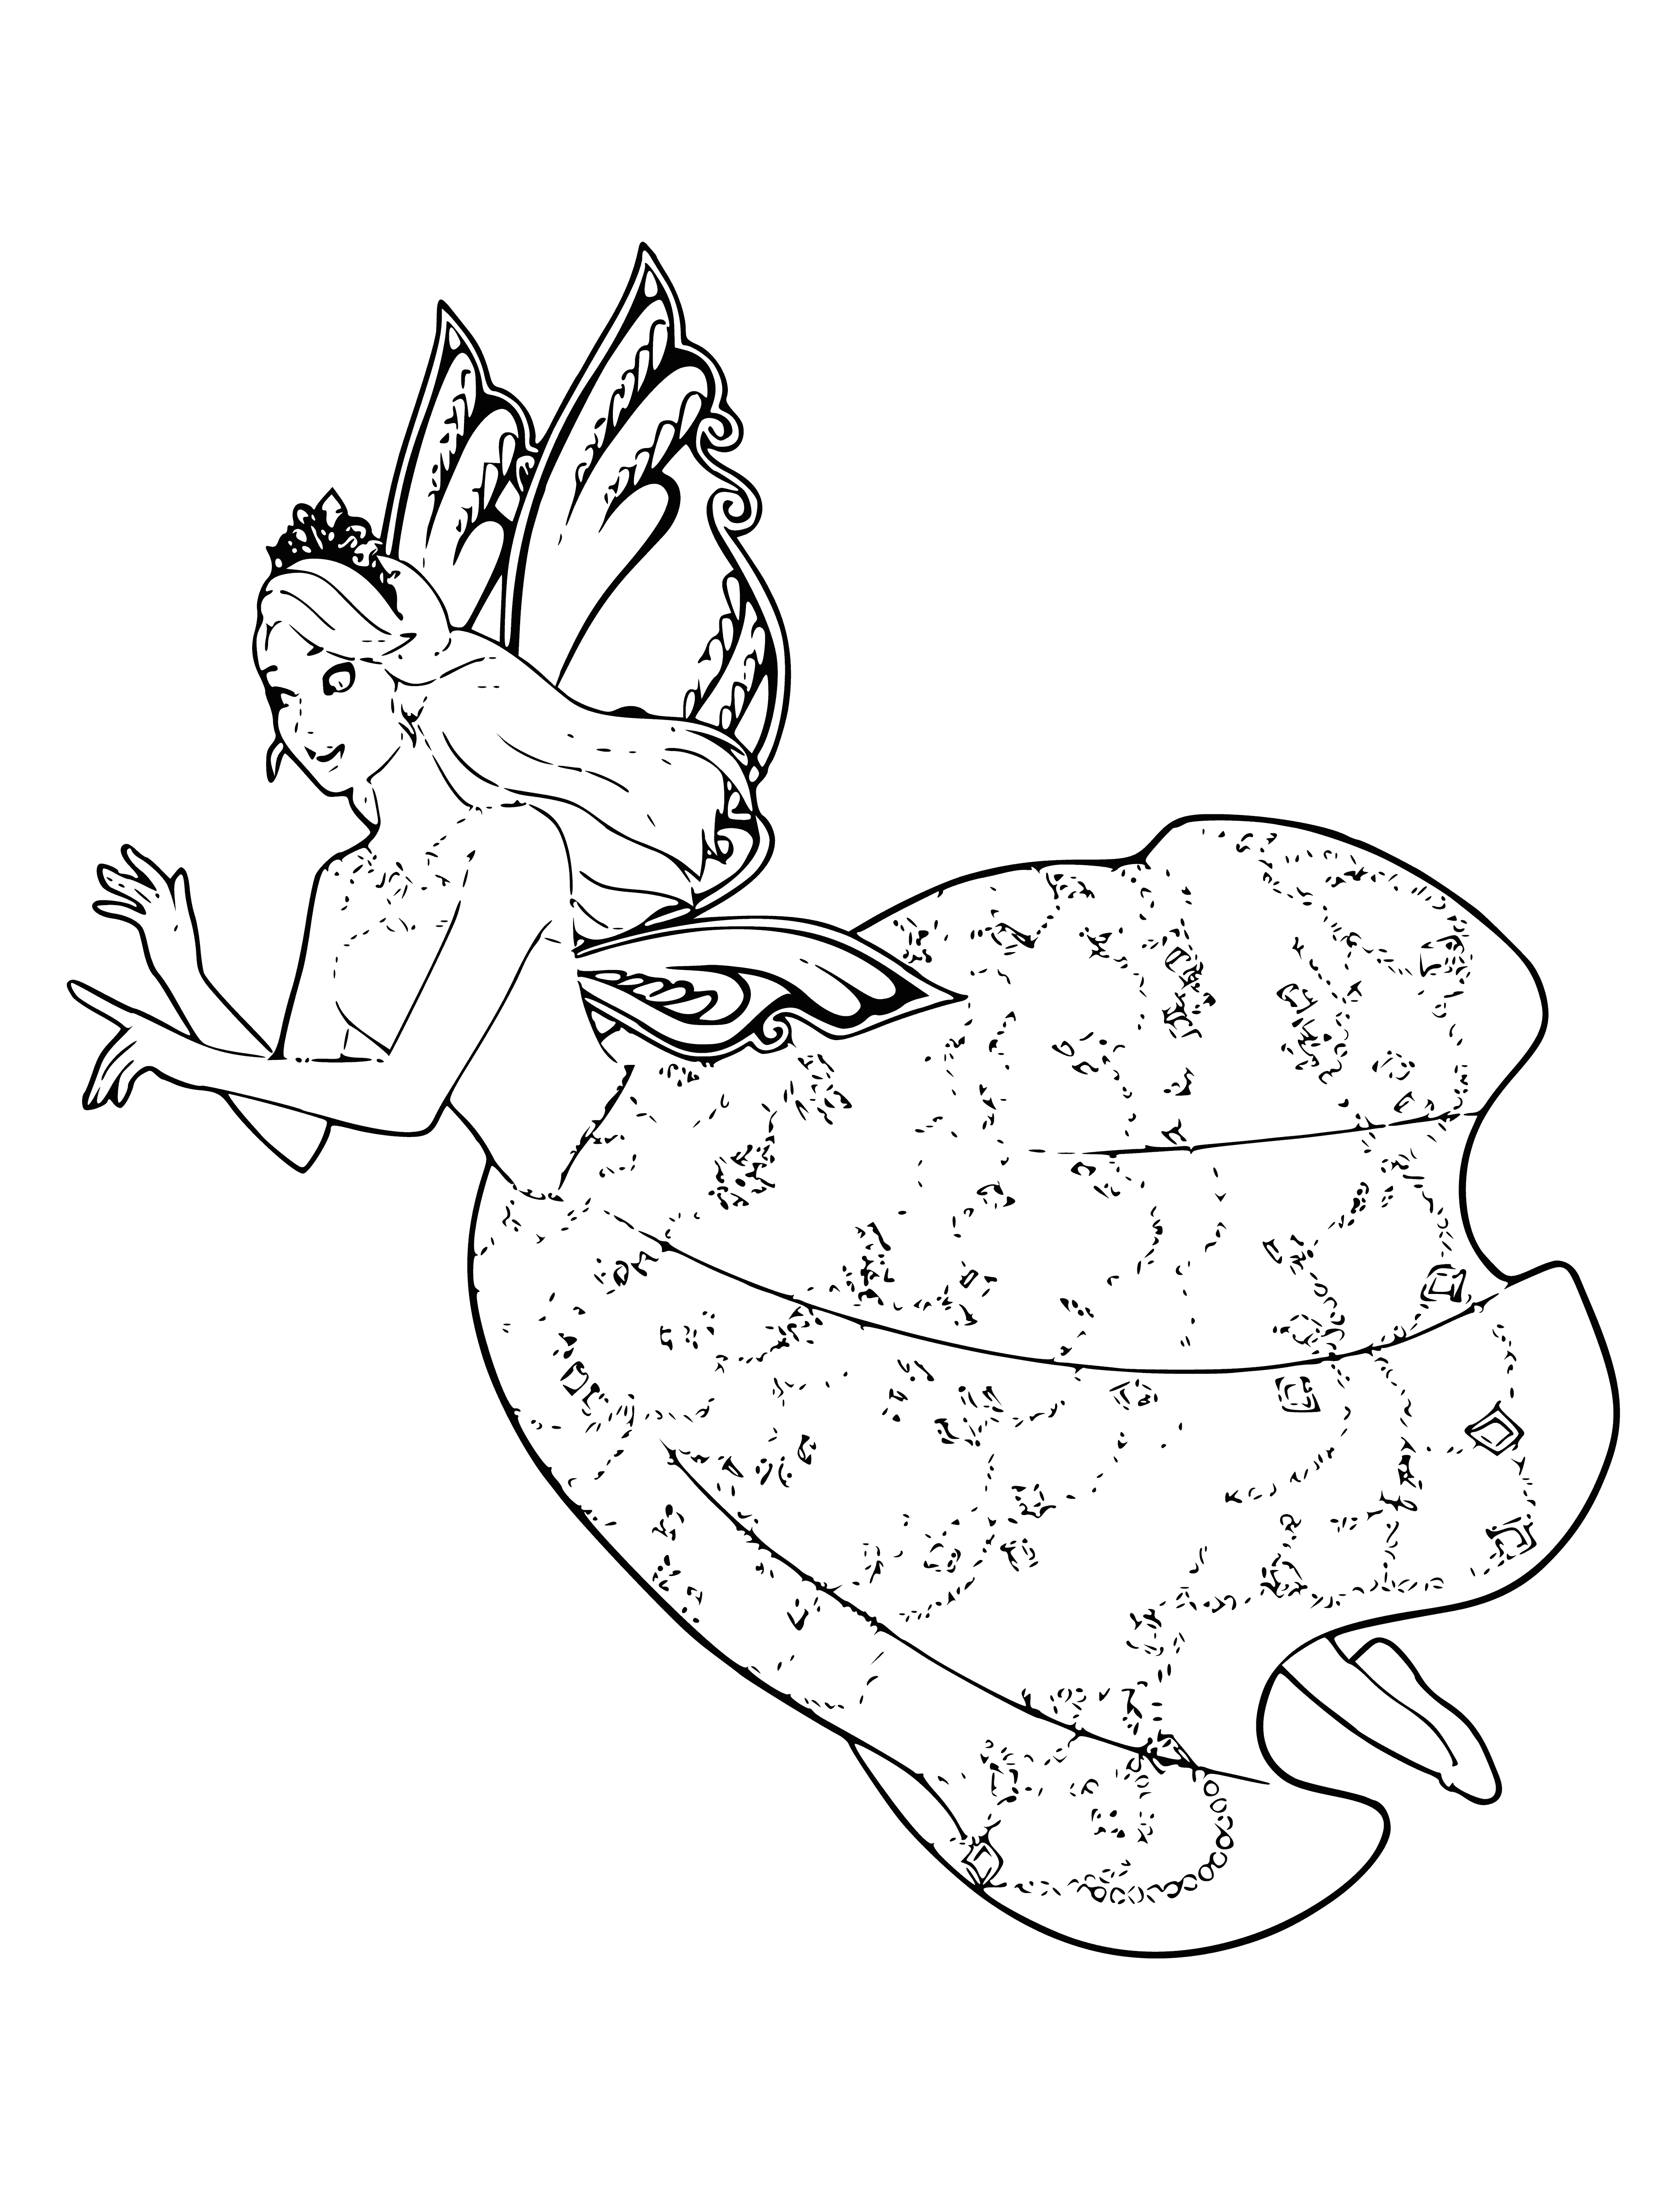 coloring page: Fairy Catania is a fairytale princess living in a magical valley where the sun always shines and the flowers never stop blooming.